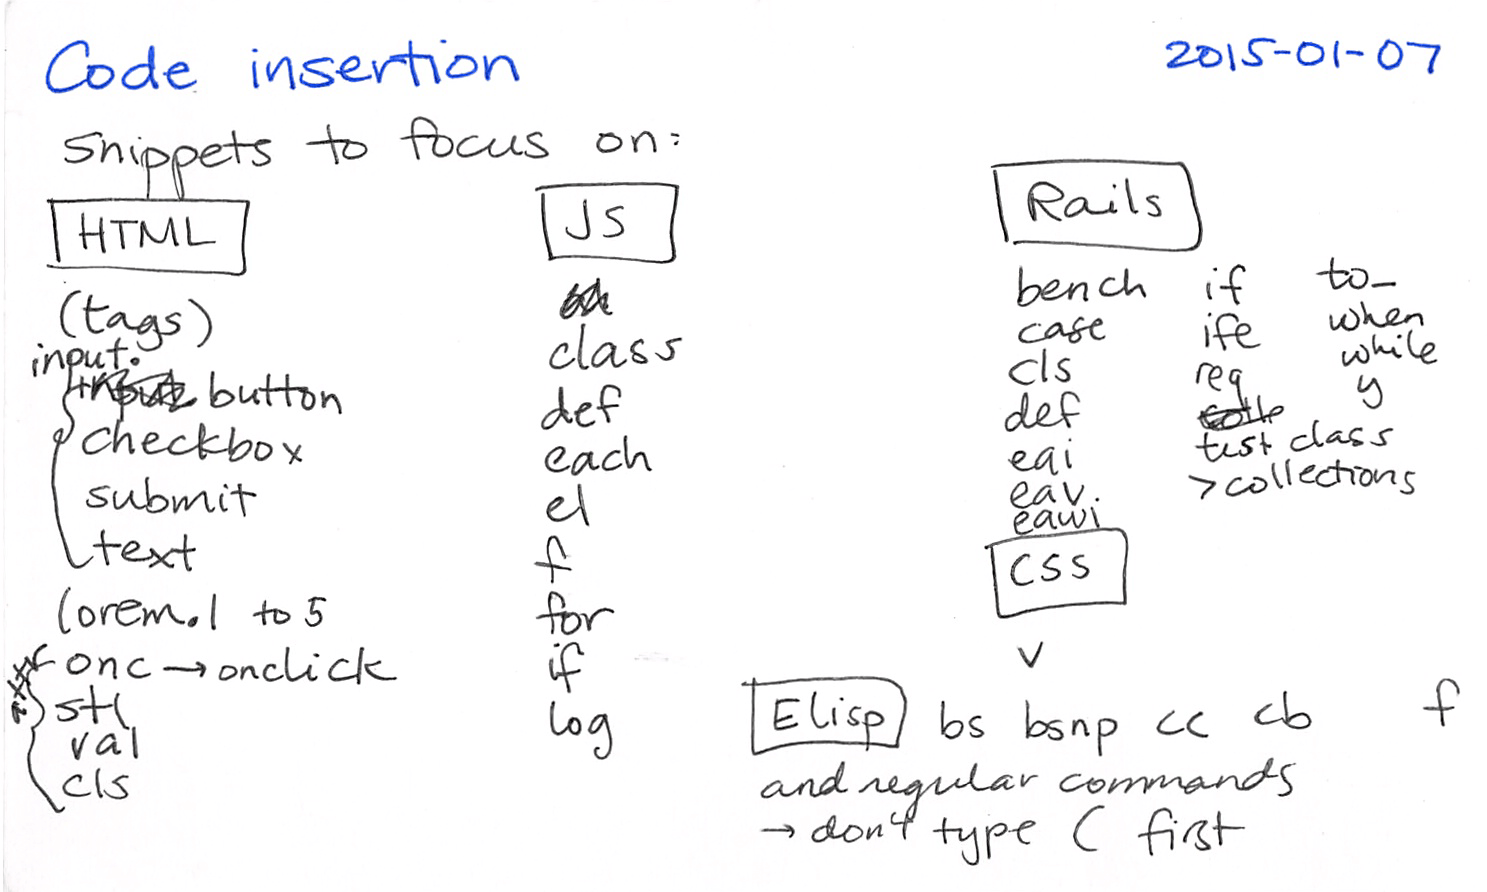 2015-01-07 Code insertion -- index card